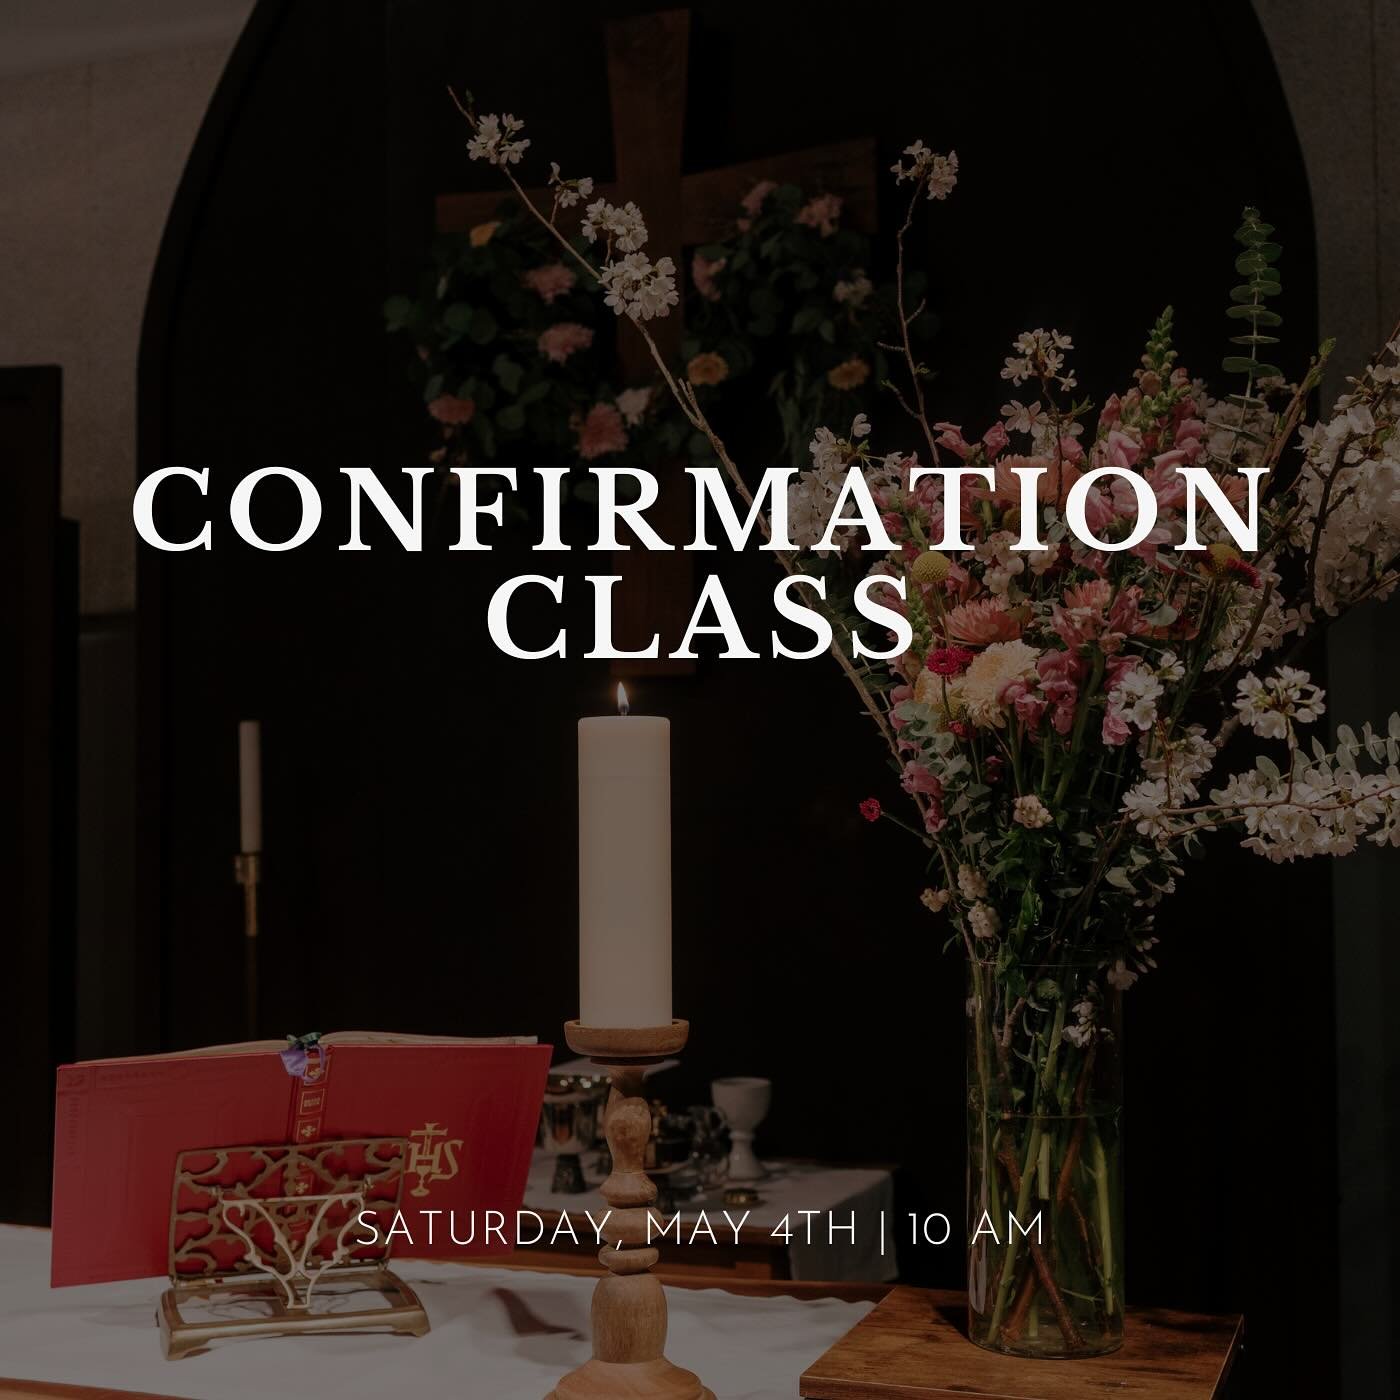 Curious about Confirmation? During this class, we will explore the formative and rooted elements of our faith and our Anglican tradition, learn more about the process of Confirmation, and have a space to reflect and ask questions.

The class will be 